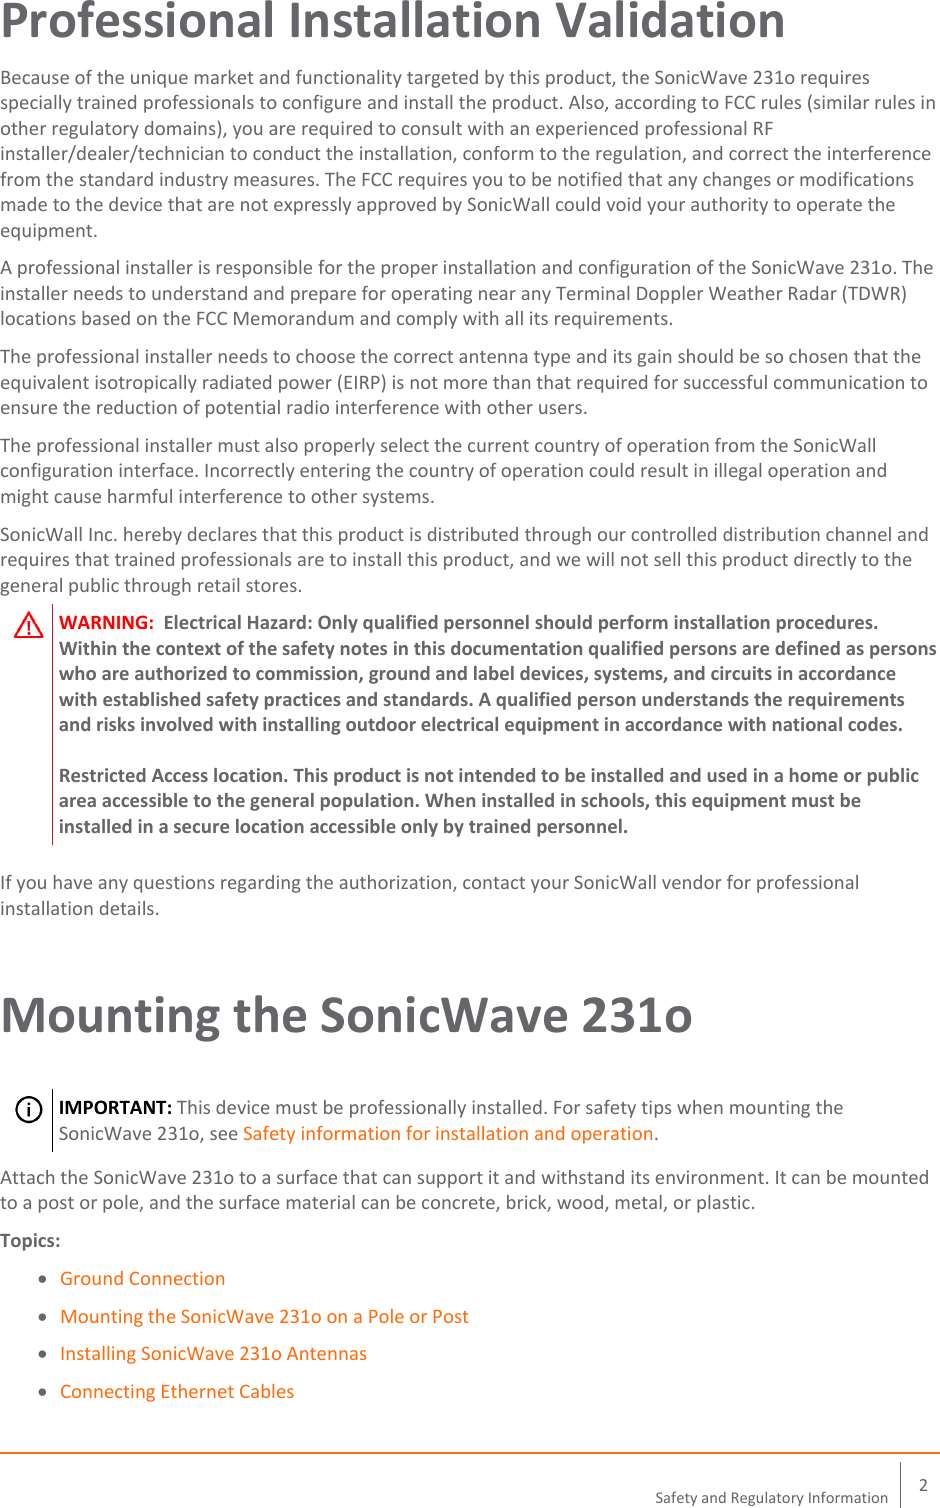    2 Safety and Regulatory Information  Professional Installation Validation Because of the unique market and functionality targeted by this product, the SonicWave 231o requires specially trained professionals to configure and install the product. Also, according to FCC rules (similar rules in other regulatory domains), you are required to consult with an experienced professional RF installer/dealer/technician to conduct the installation, conform to the regulation, and correct the interference from the standard industry measures. The FCC requires you to be notified that any changes or modifications made to the device that are not expressly approved by SonicWall could void your authority to operate the equipment. A professional installer is responsible for the proper installation and configuration of the SonicWave 231o. The installer needs to understand and prepare for operating near any Terminal Doppler Weather Radar (TDWR) locations based on the FCC Memorandum and comply with all its requirements. The professional installer needs to choose the correct antenna type and its gain should be so chosen that the equivalent isotropically radiated power (EIRP) is not more than that required for successful communication to ensure the reduction of potential radio interference with other users. The professional installer must also properly select the current country of operation from the SonicWall configuration interface. Incorrectly entering the country of operation could result in illegal operation and might cause harmful interference to other systems. SonicWall Inc. hereby declares that this product is distributed through our controlled distribution channel and requires that trained professionals are to install this product, and we will not sell this product directly to the general public through retail stores.   WARNING:  Electrical Hazard: Only qualified personnel should perform installation procedures. Within the context of the safety notes in this documentation qualified persons are defined as persons who are authorized to commission, ground and label devices, systems, and circuits in accordance with established safety practices and standards. A qualified person understands the requirements and risks involved with installing outdoor electrical equipment in accordance with national codes.  Restricted Access location. This product is not intended to be installed and used in a home or public area accessible to the general population. When installed in schools, this equipment must be installed in a secure location accessible only by trained personnel.   If you have any questions regarding the authorization, contact your SonicWall vendor for professional installation details. Mounting the SonicWave 231o    IMPORTANT: This device must be professionally installed. For safety tips when mounting the SonicWave 231o, see Safety information for installation and operation. Attach the SonicWave 231o to a surface that can support it and withstand its environment. It can be mounted to a post or pole, and the surface material can be concrete, brick, wood, metal, or plastic. Topics:  Ground Connection  Mounting the SonicWave 231o on a Pole or Post  Installing SonicWave 231o Antennas  Connecting Ethernet Cables 